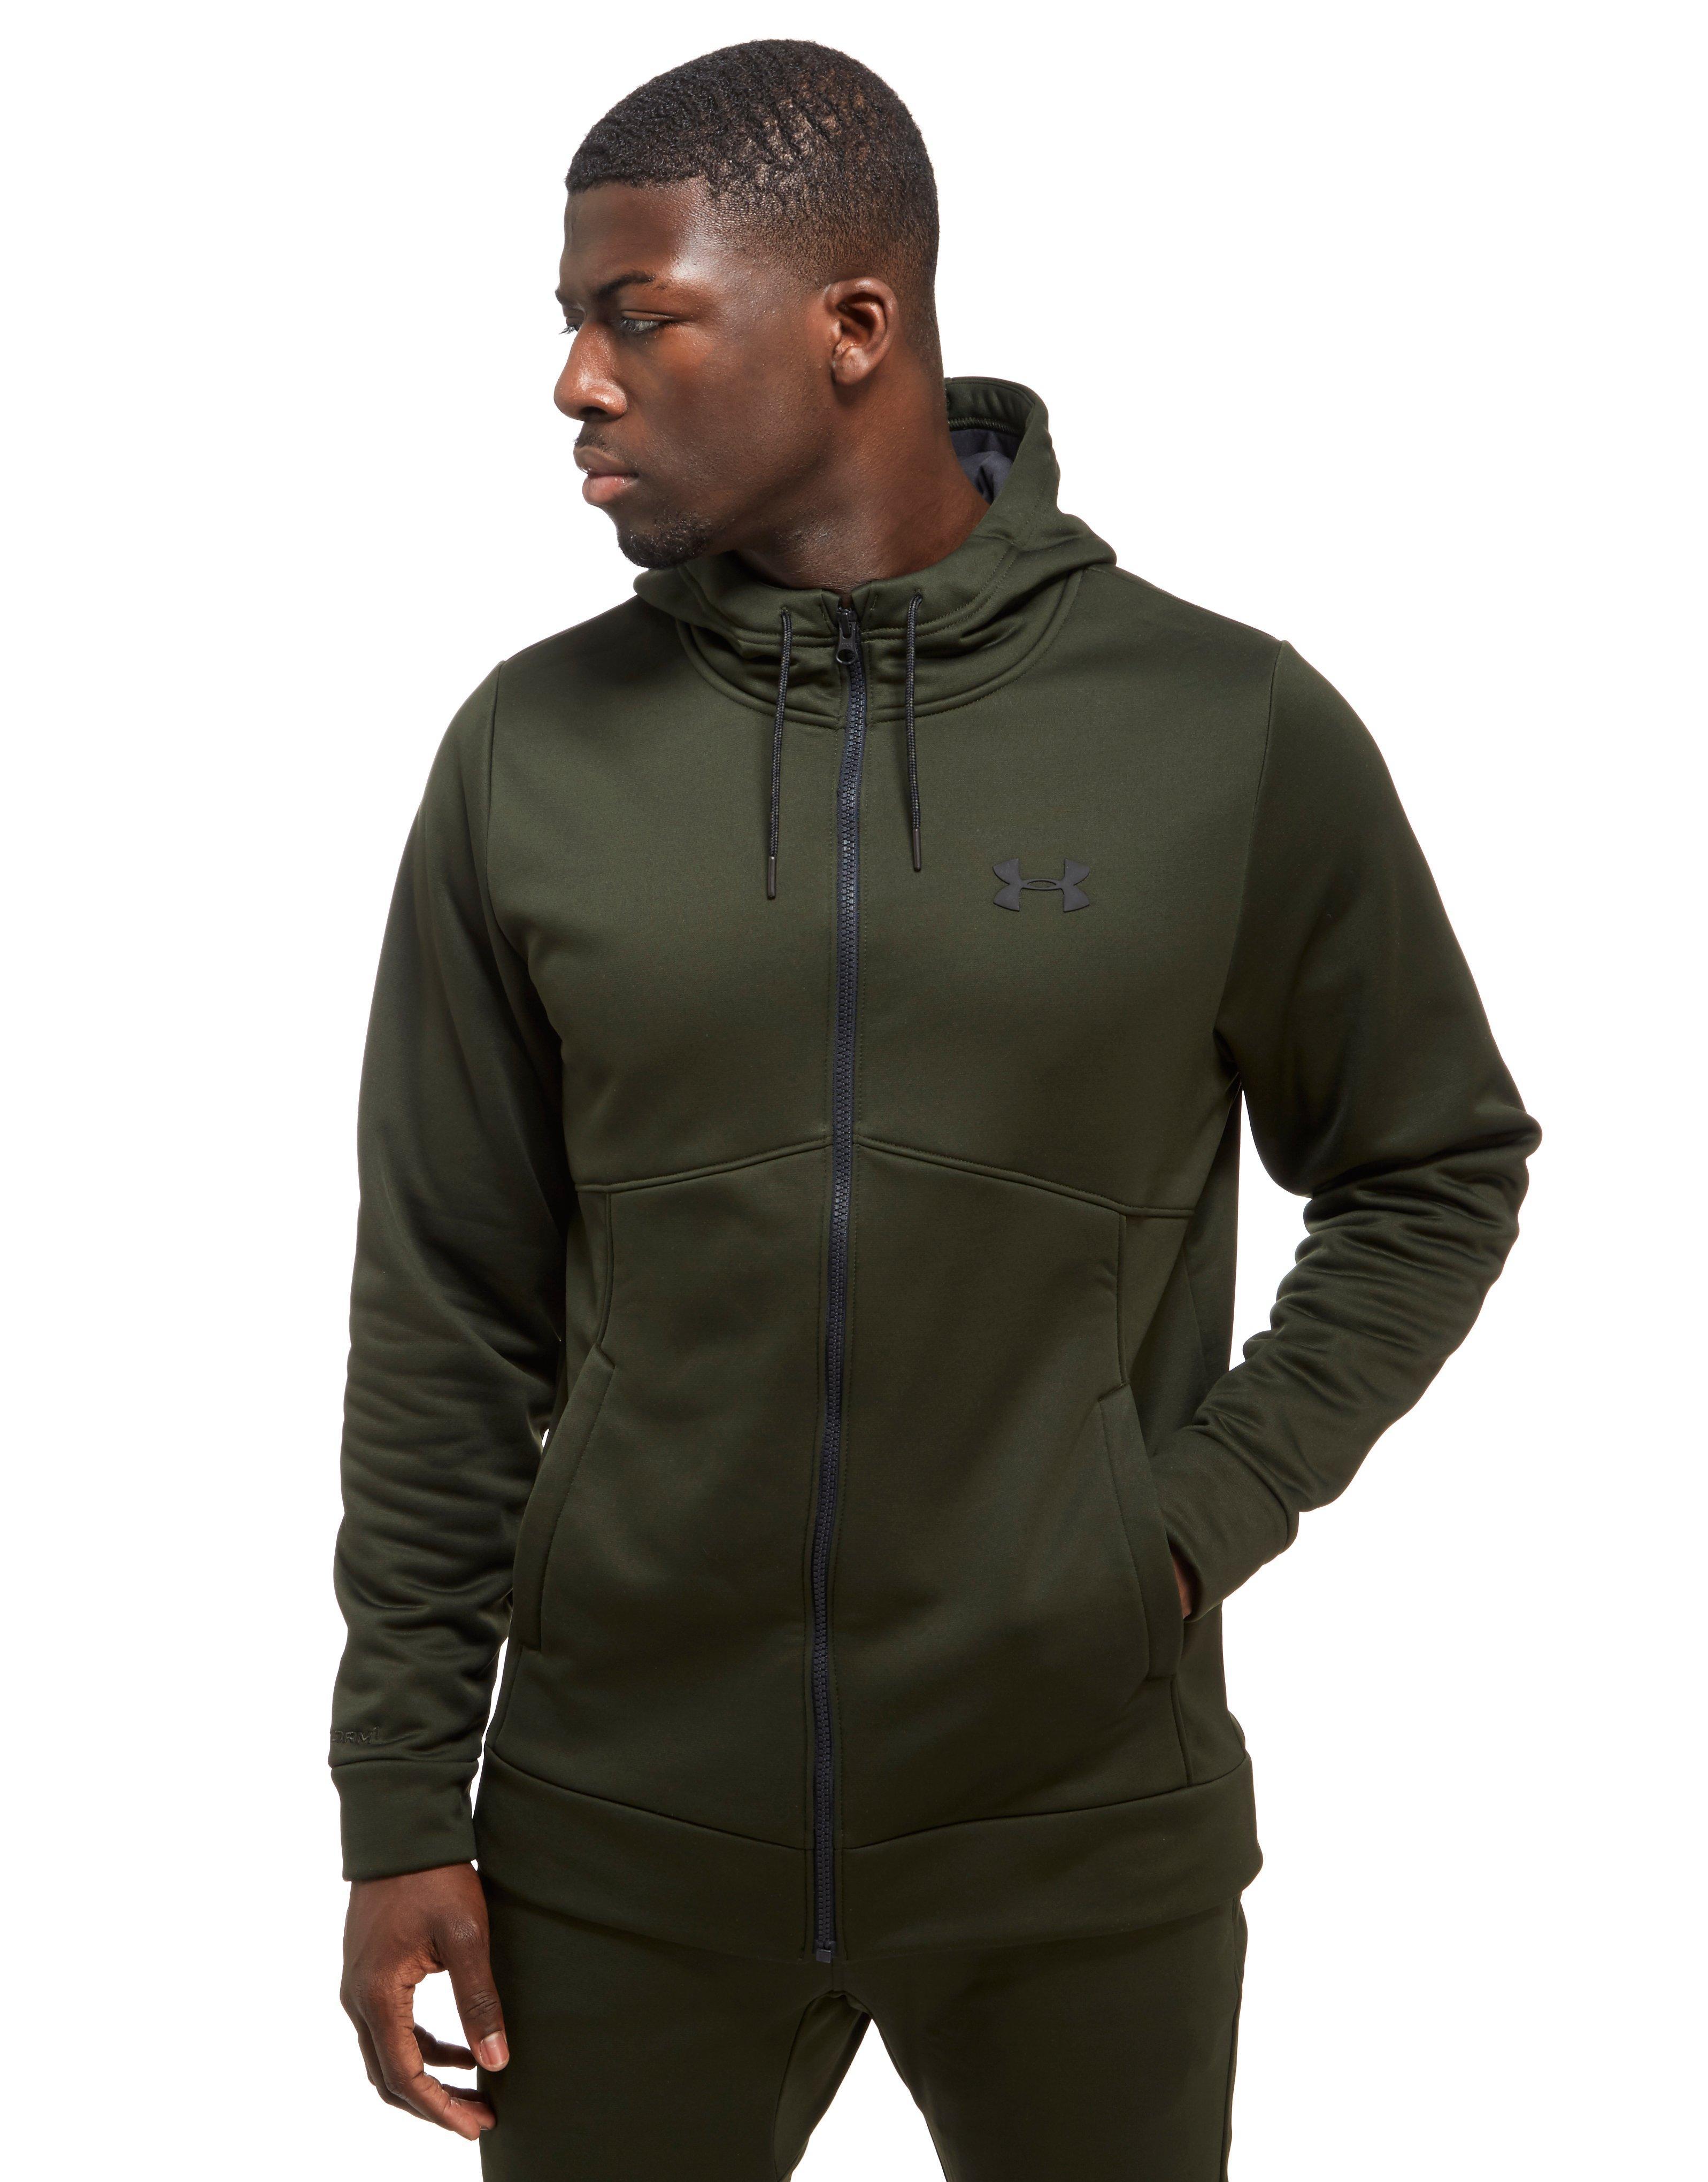 under armour icon full zip hoodie green Online Shopping for Women, Men,  Kids Fashion & Lifestyle|Free Delivery & Returns! -